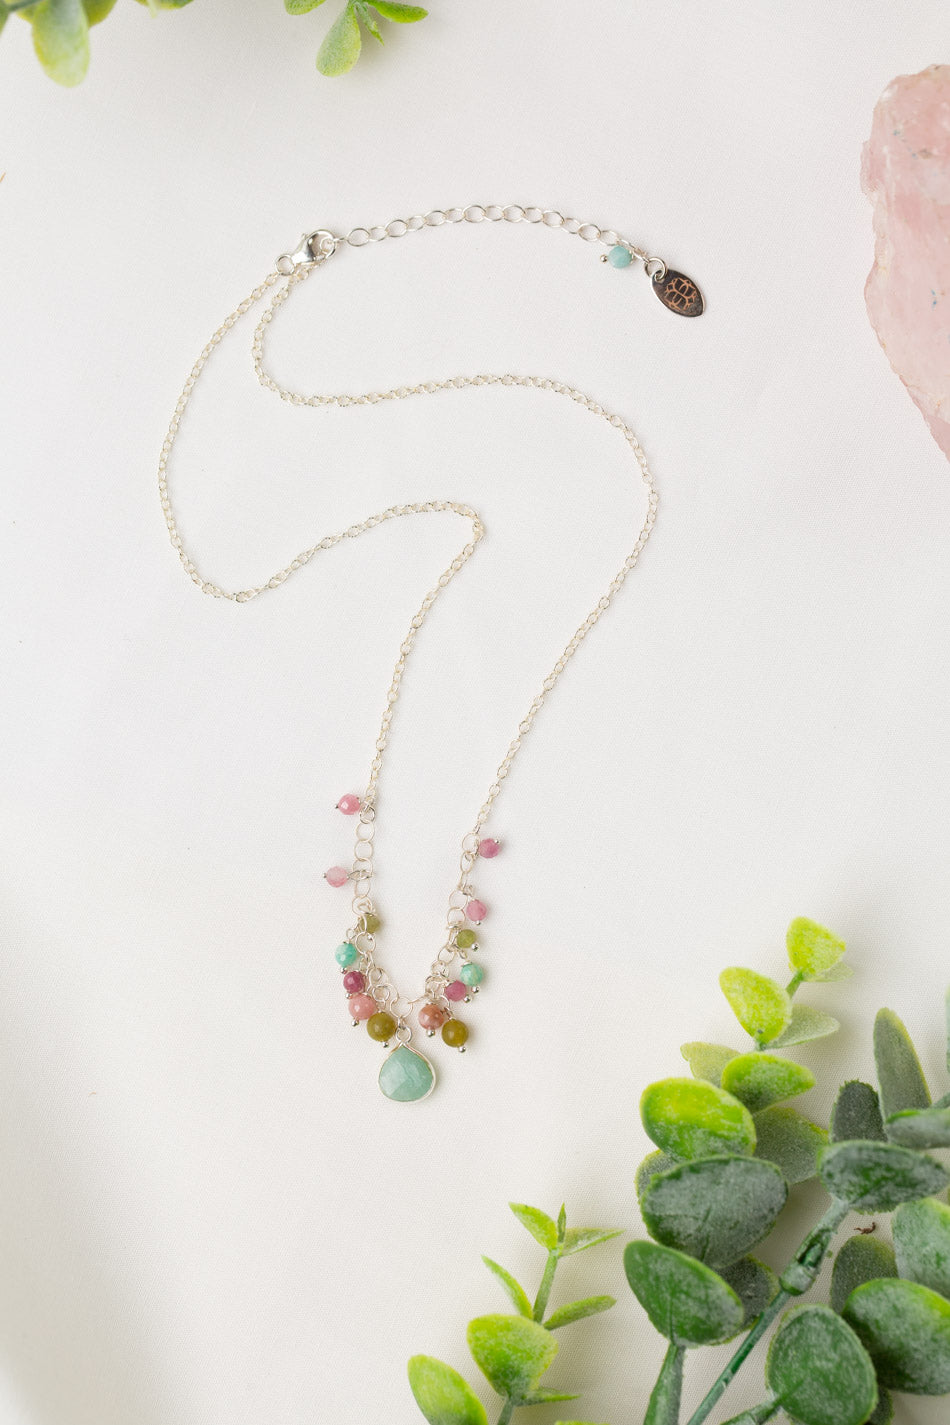 Limited Edition 15.5-17.5" Rhodochrosite, Olive Jade, Pink Tourmaline With Faceted Amazonite Cluster Necklace